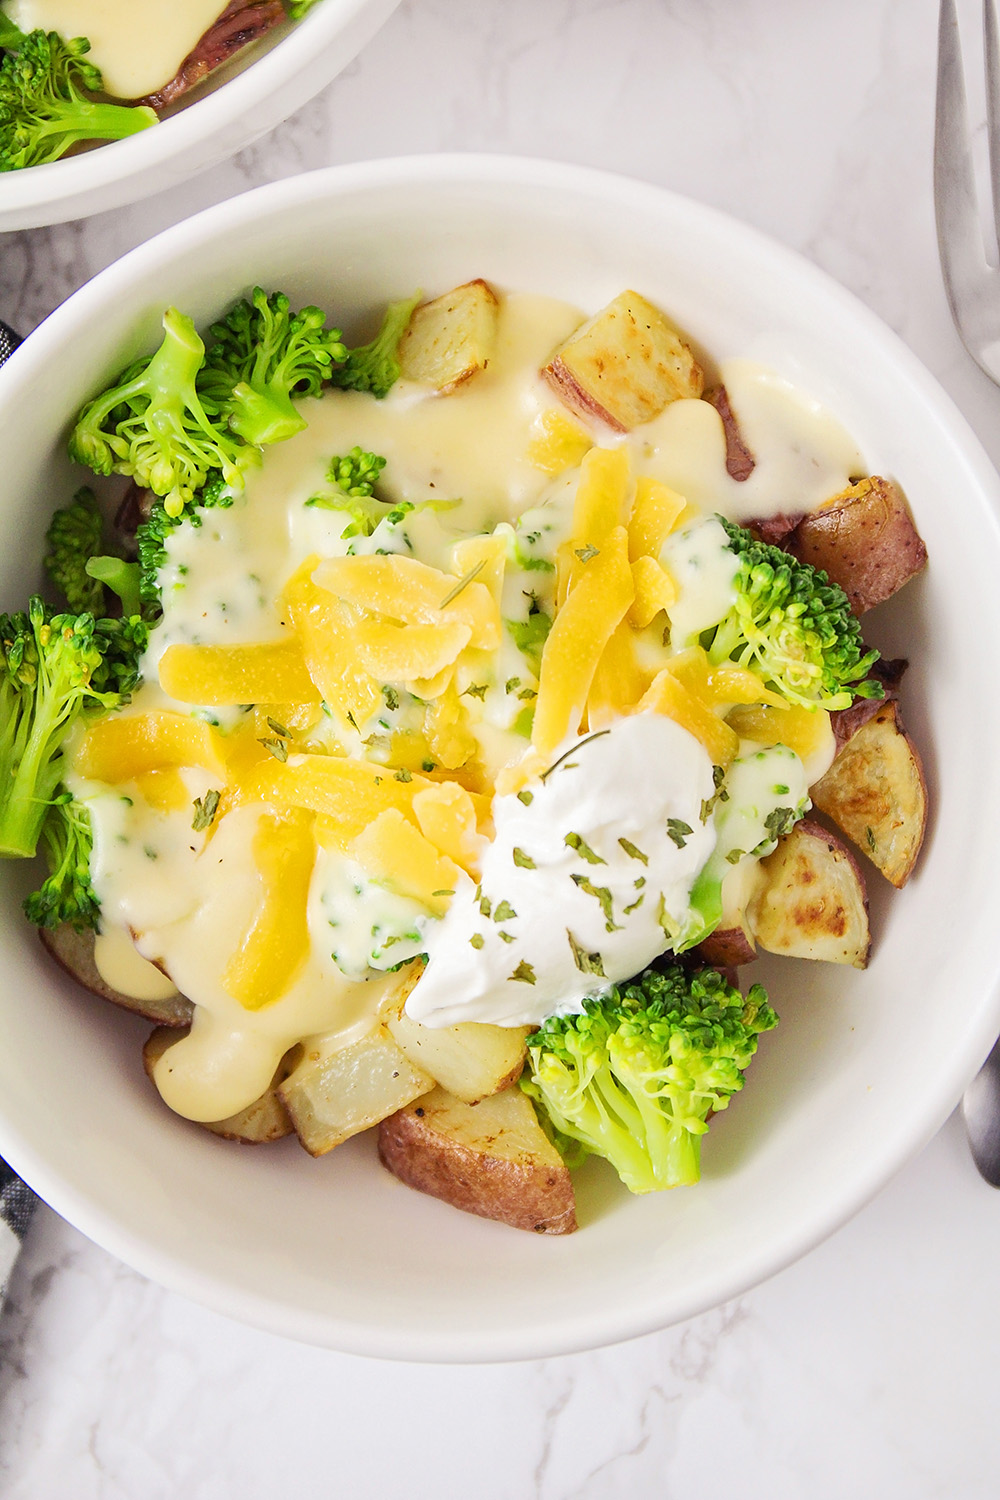 These cheesy broccoli potato bowls are a delicious meatless meal that's easy to make and perfect for a busy weeknight!